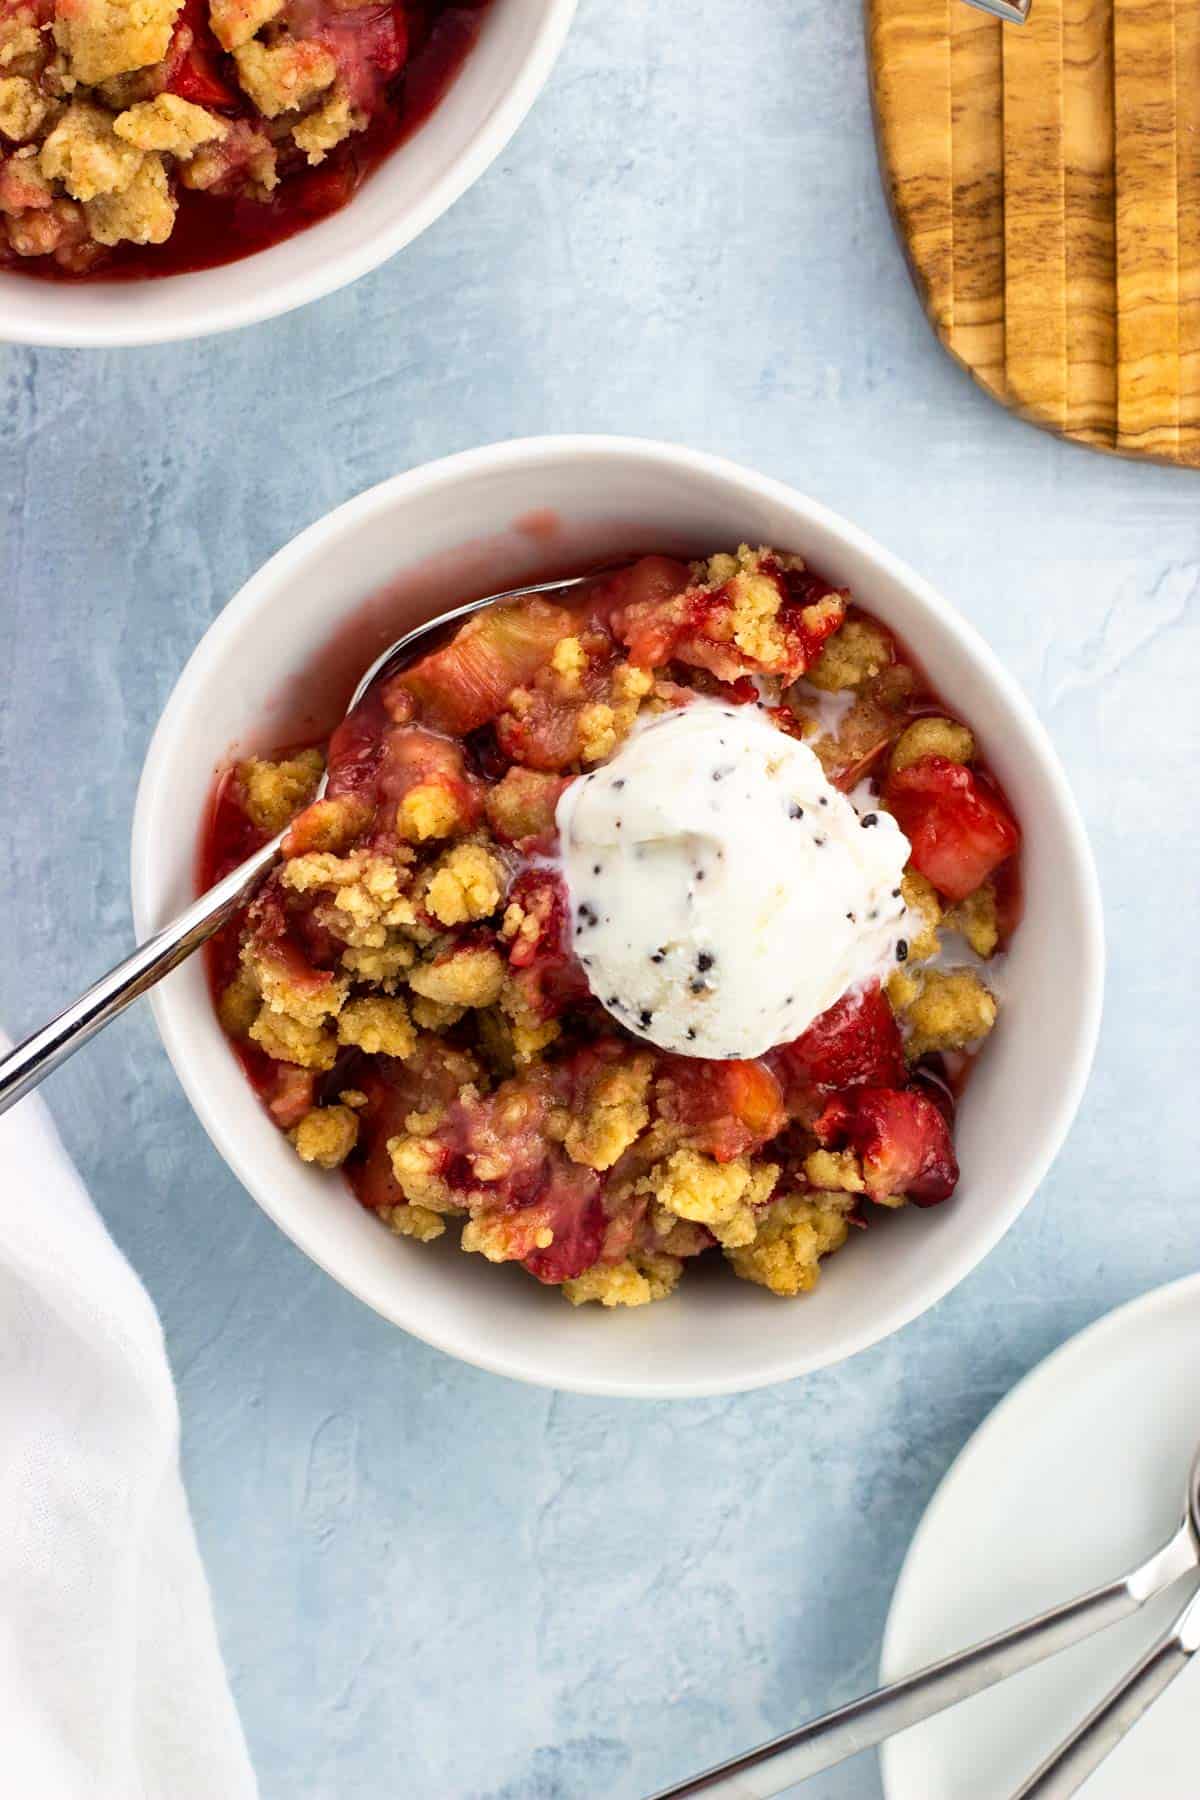 A bowl of strawberry rhubarb crumble topped with ice cream.